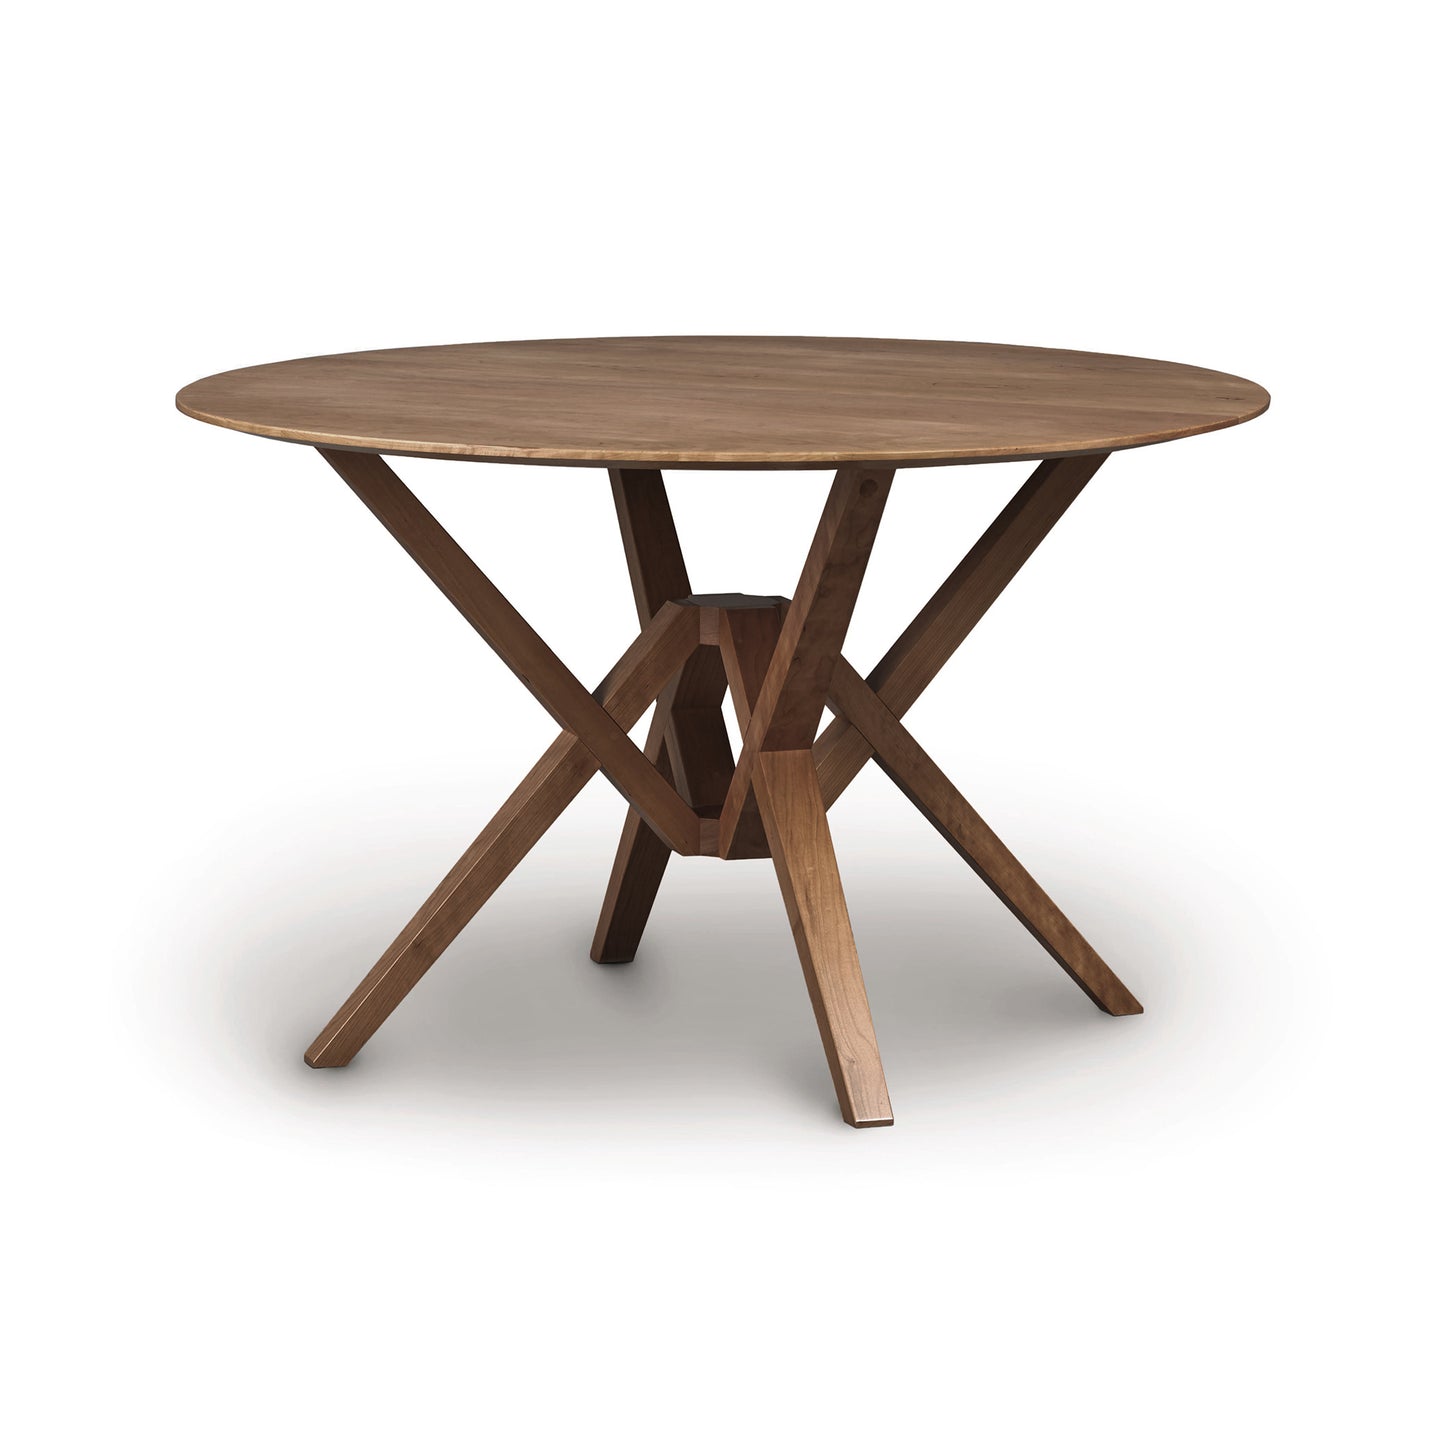 A sustainably harvested hardwoods Copeland Furniture Exeter Round Solid Top Dining Table with a cross-brace base, isolated on a white background.